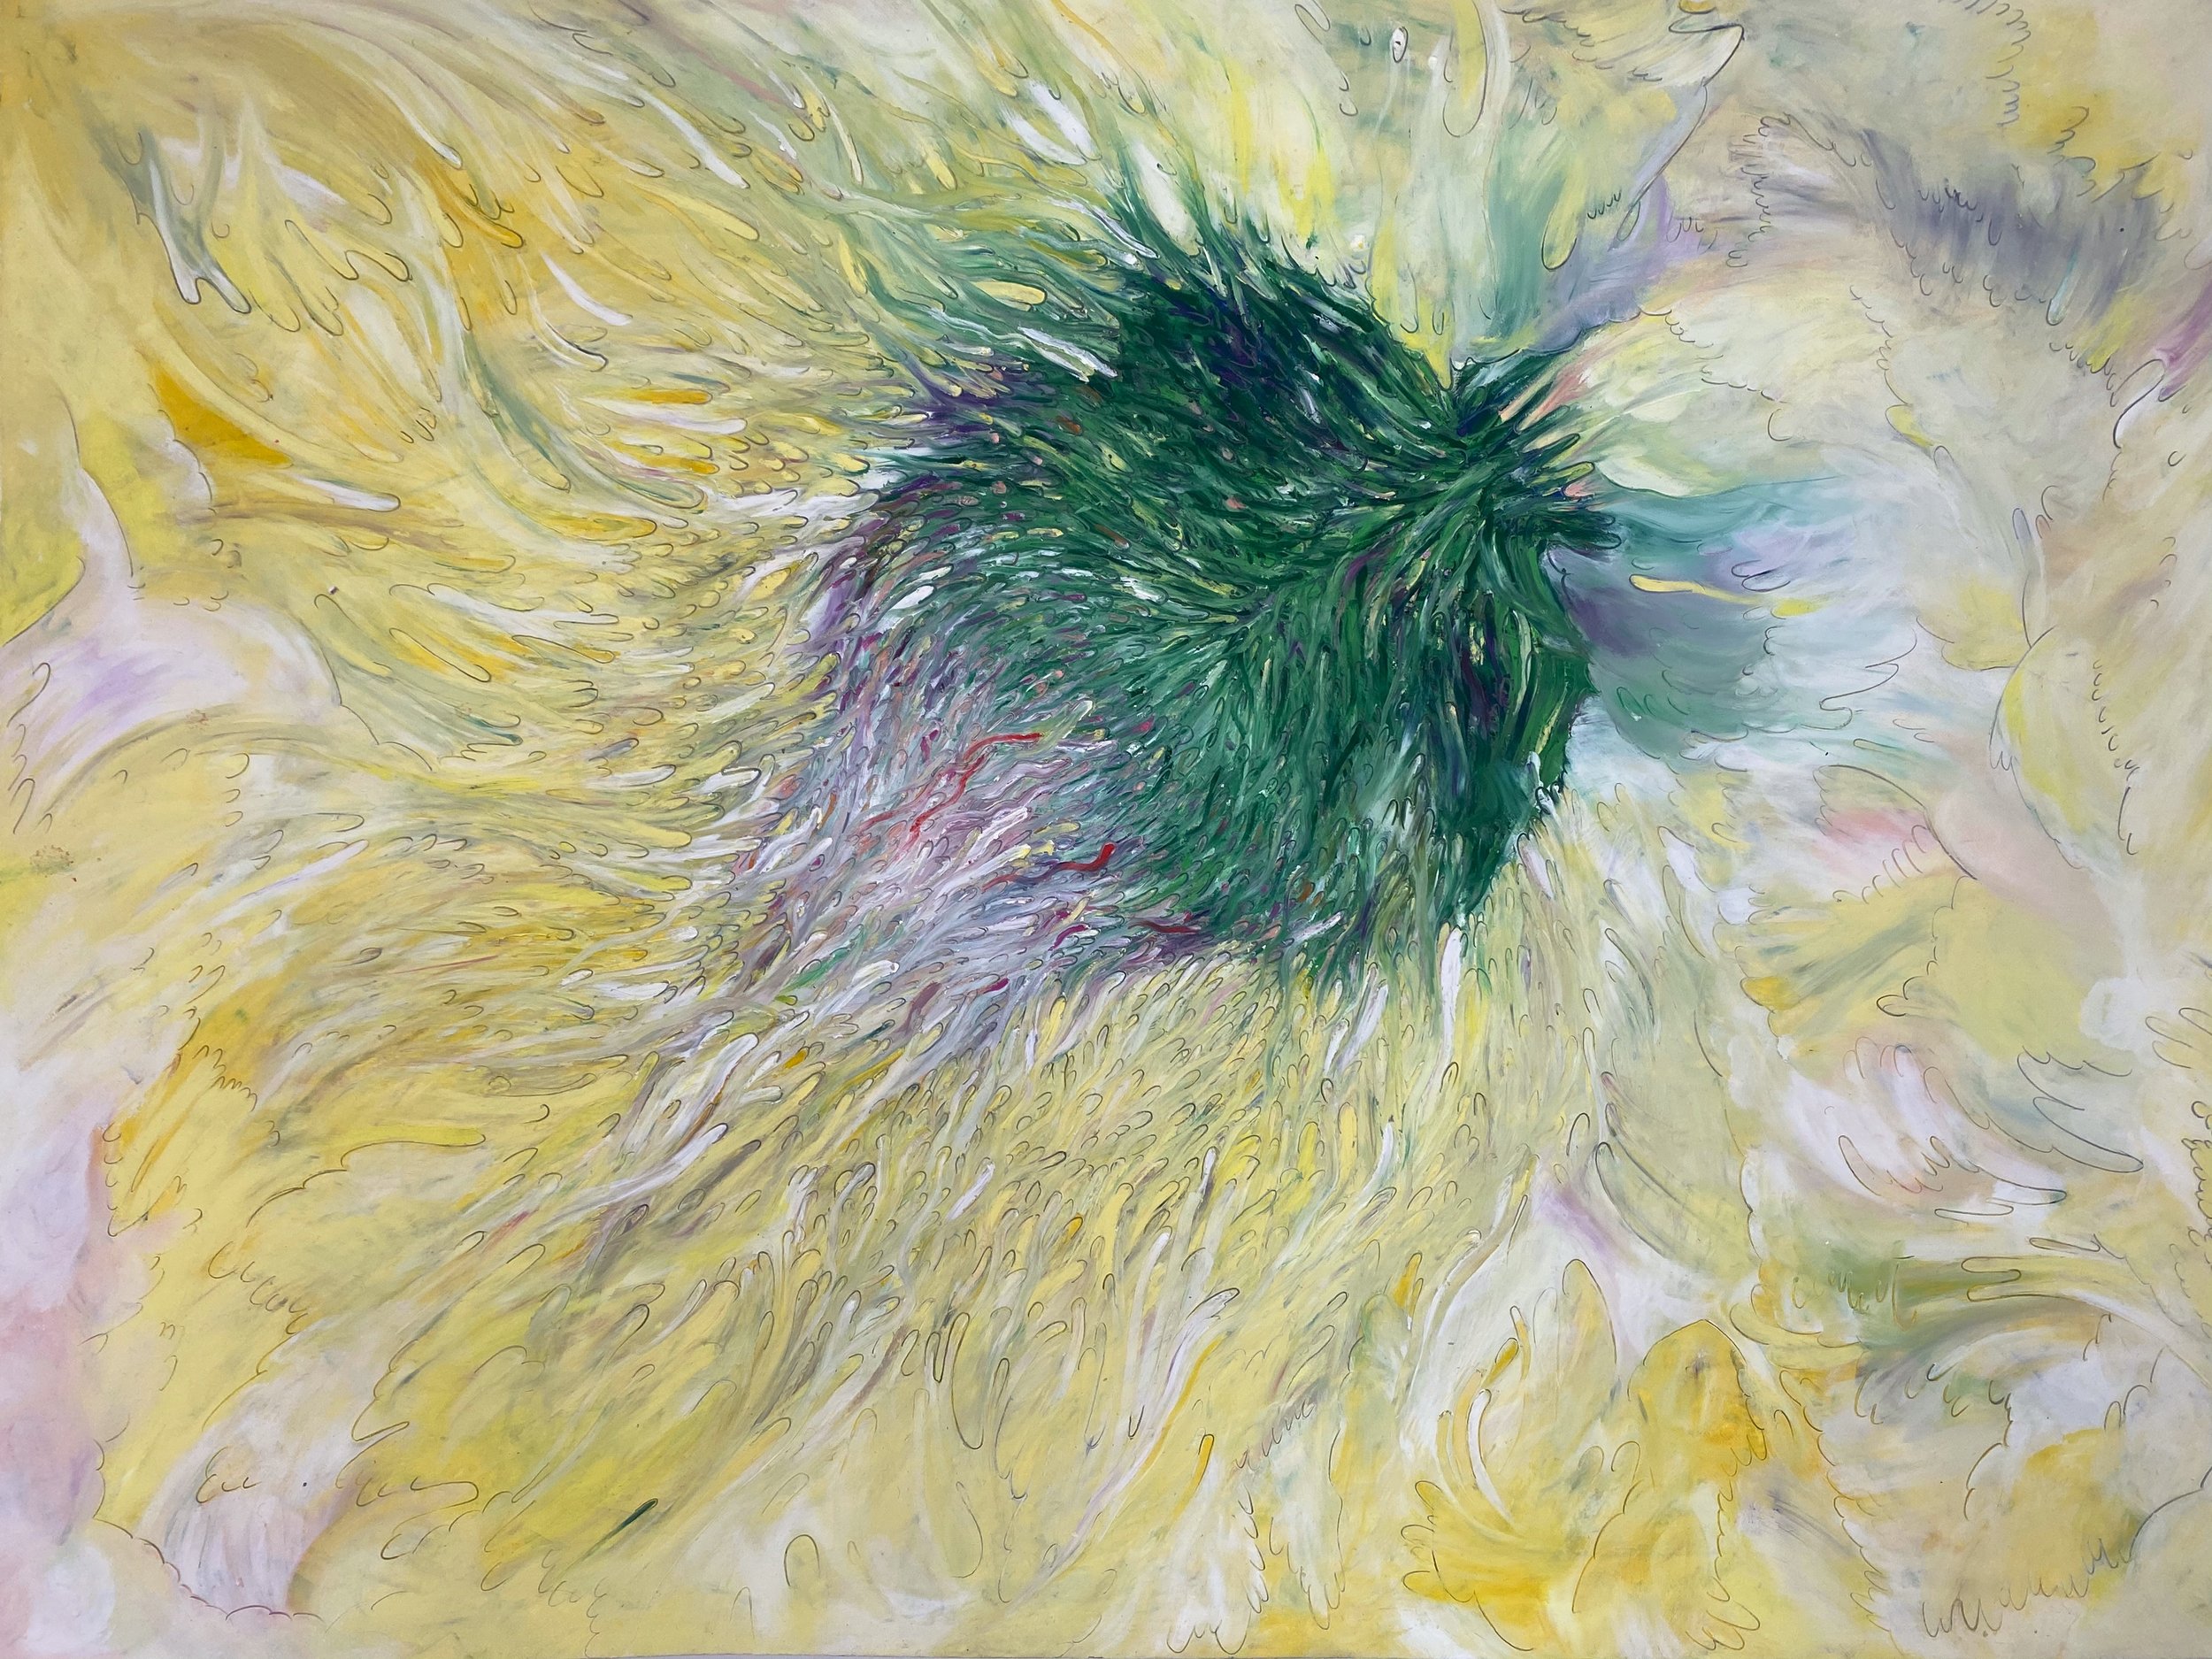  Thistle, 2021  Oil pastel on paper  22x30 inches 